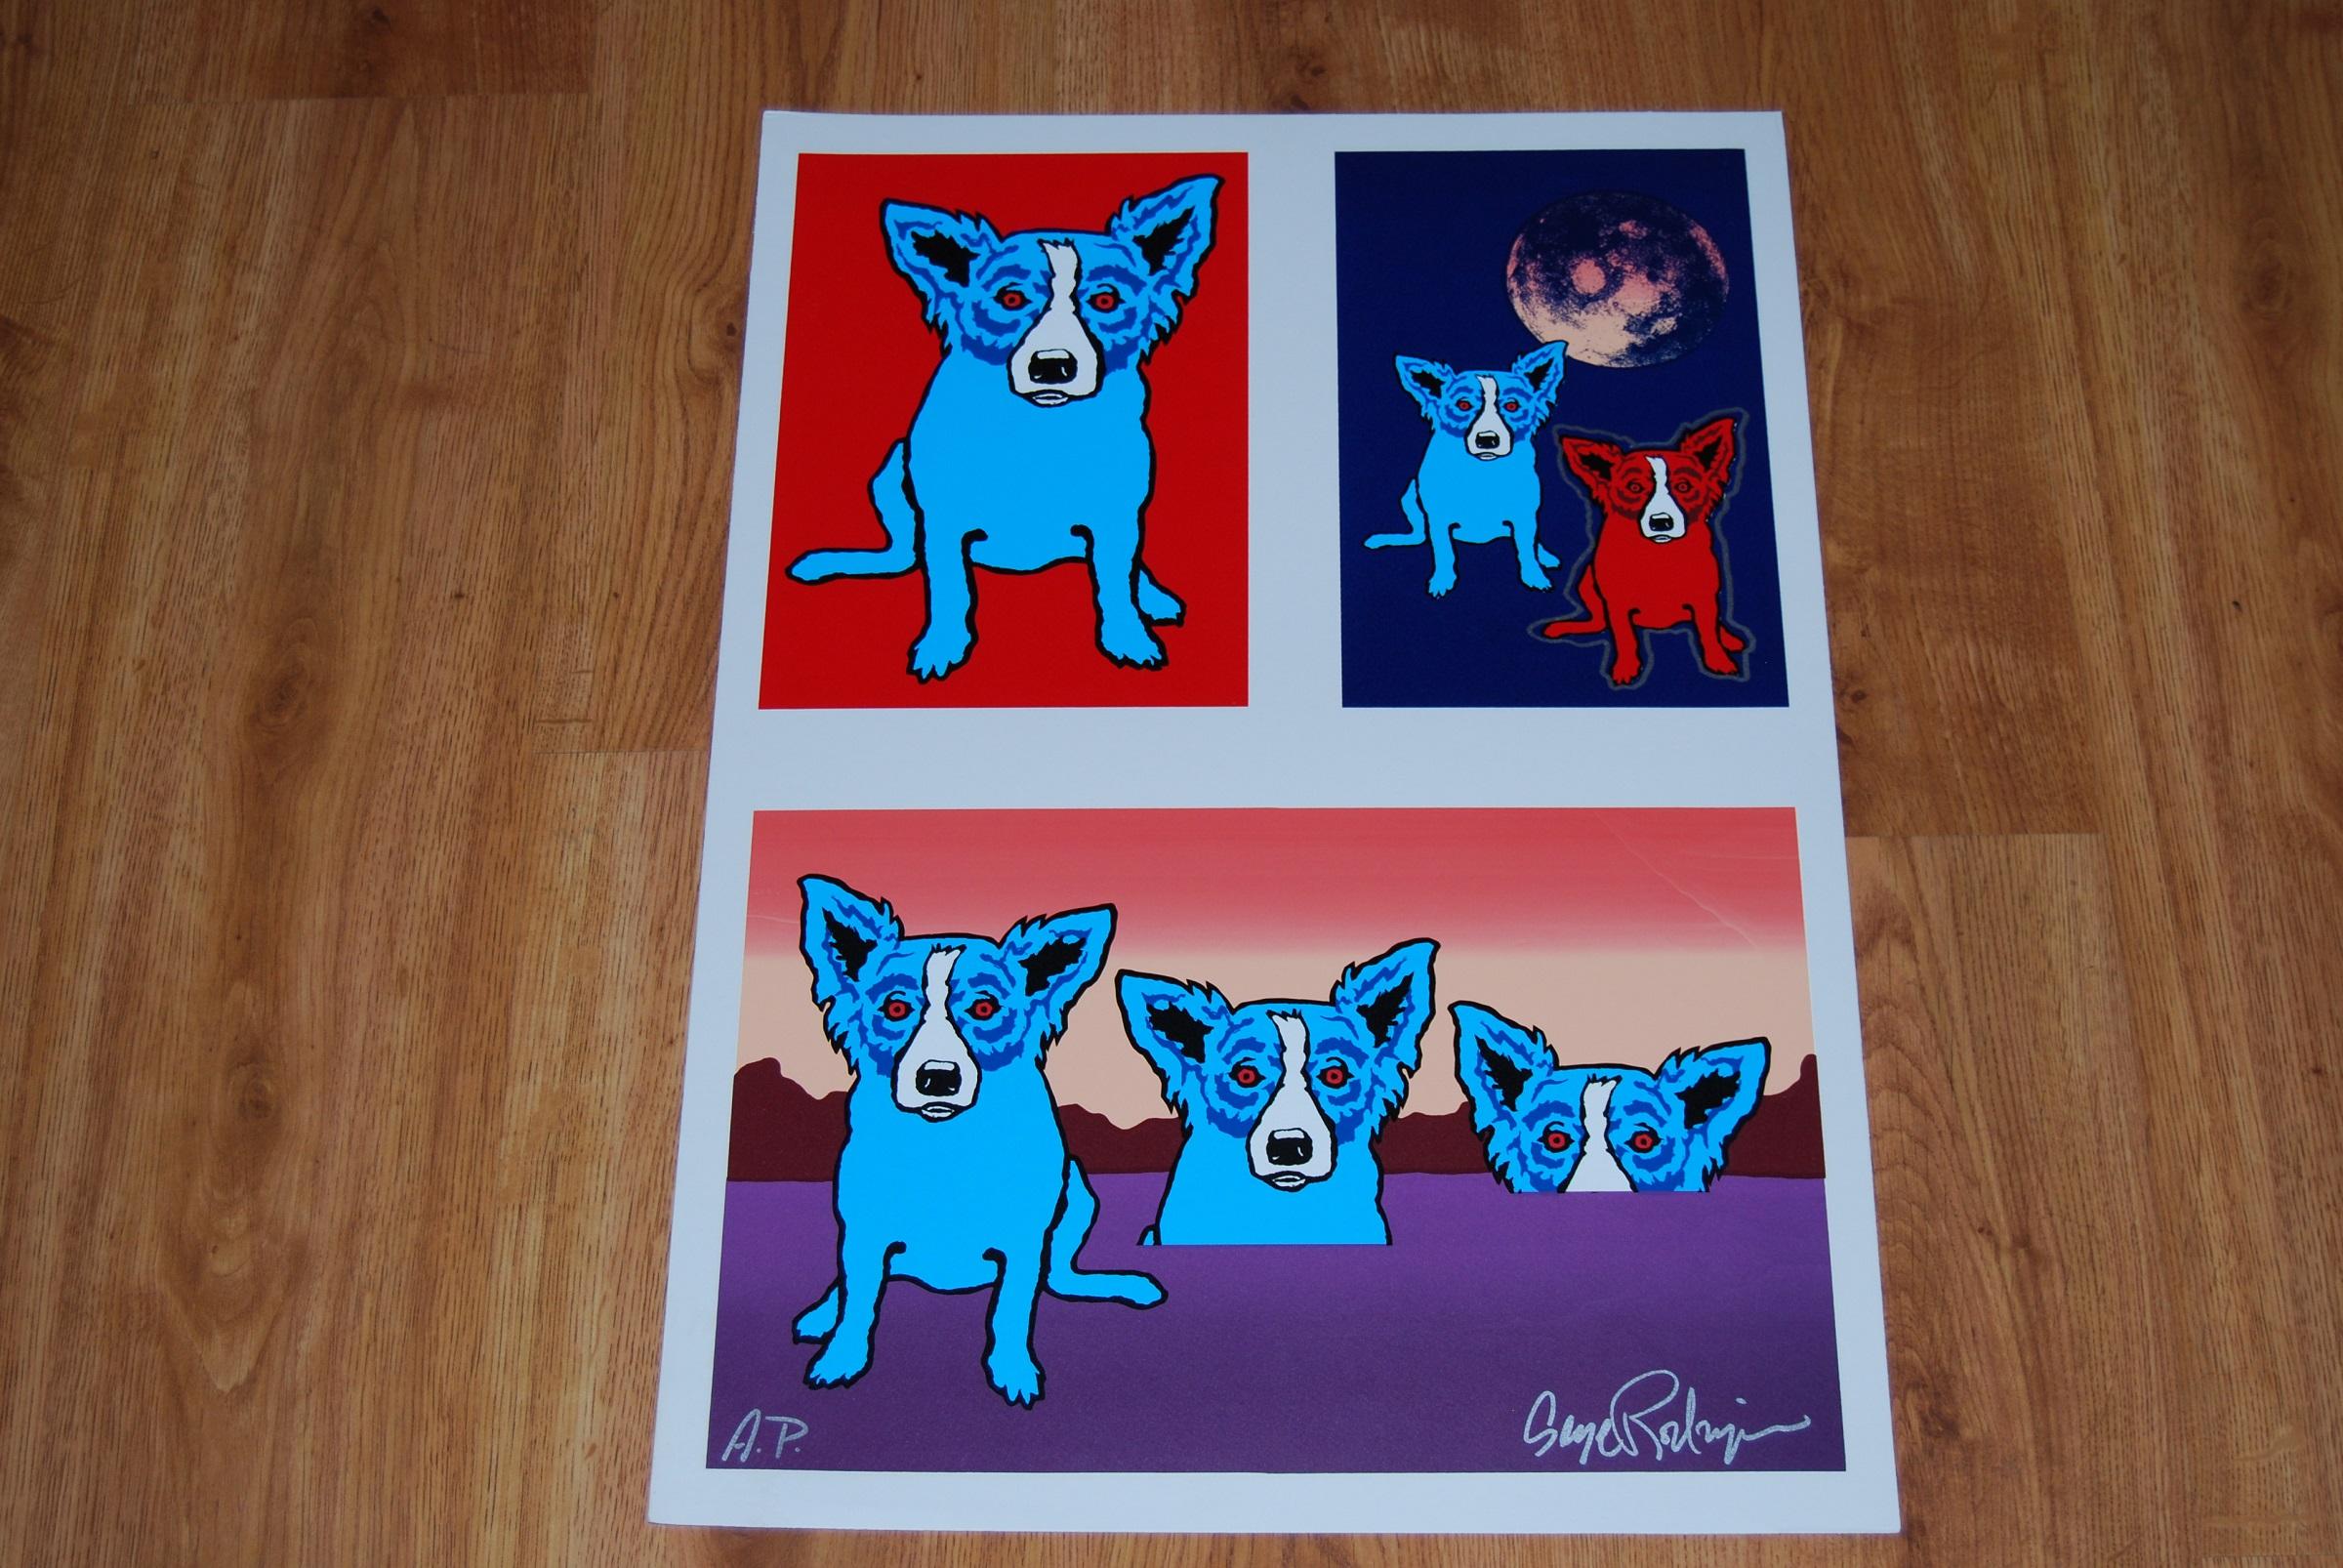 Original Untitled Proof Red Eyes - Signed Remarqued Blue Dog - Print by George Rodrigue